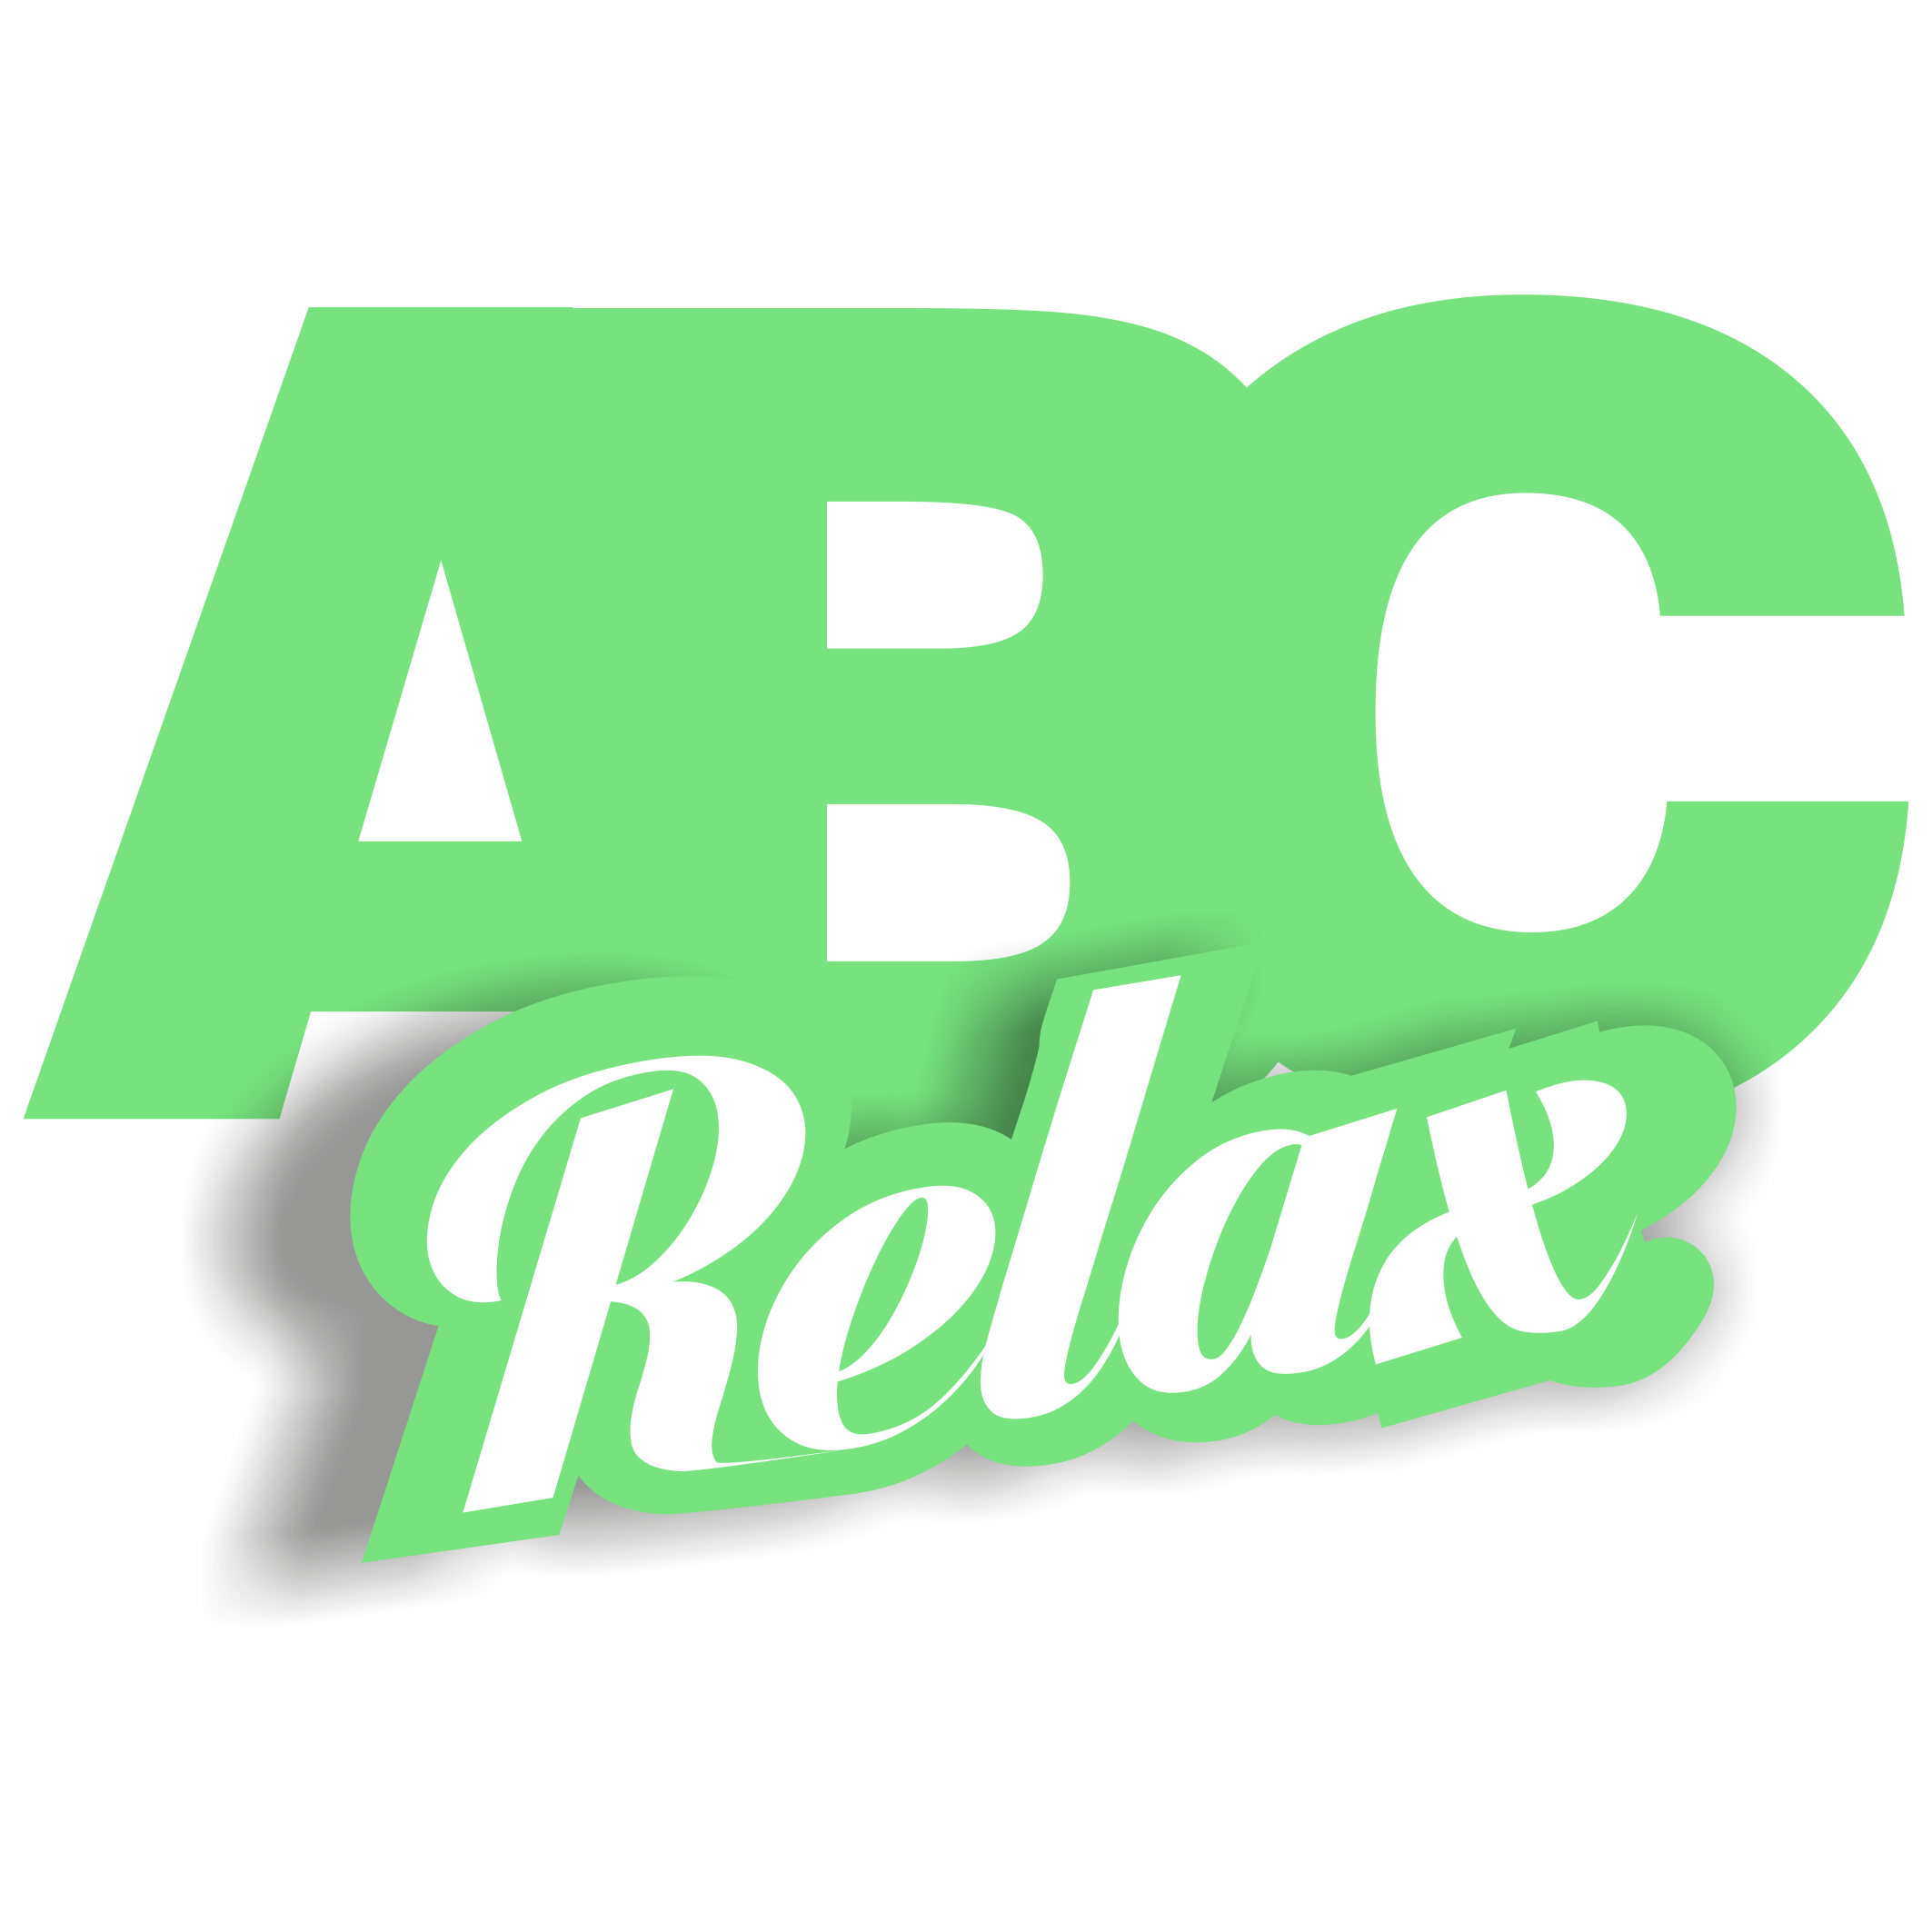 ABC Relax : le fond sonore idéal